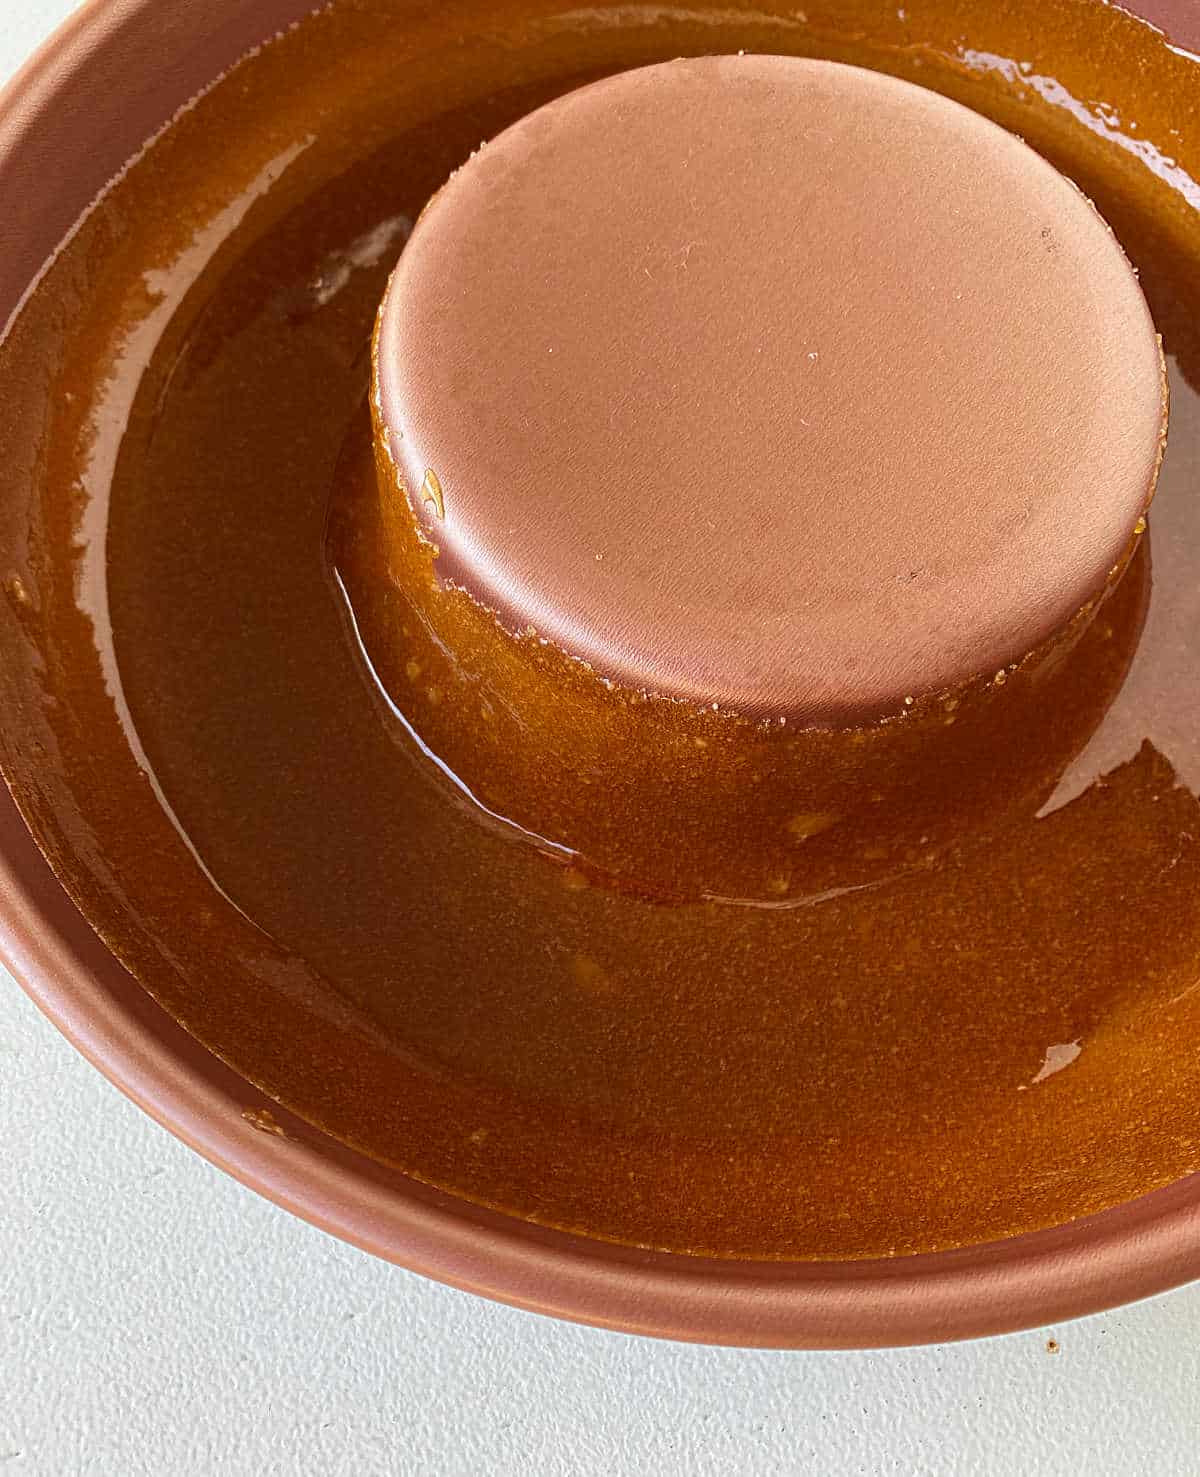 Partial view of copper flan pan coated with caramel on white surface